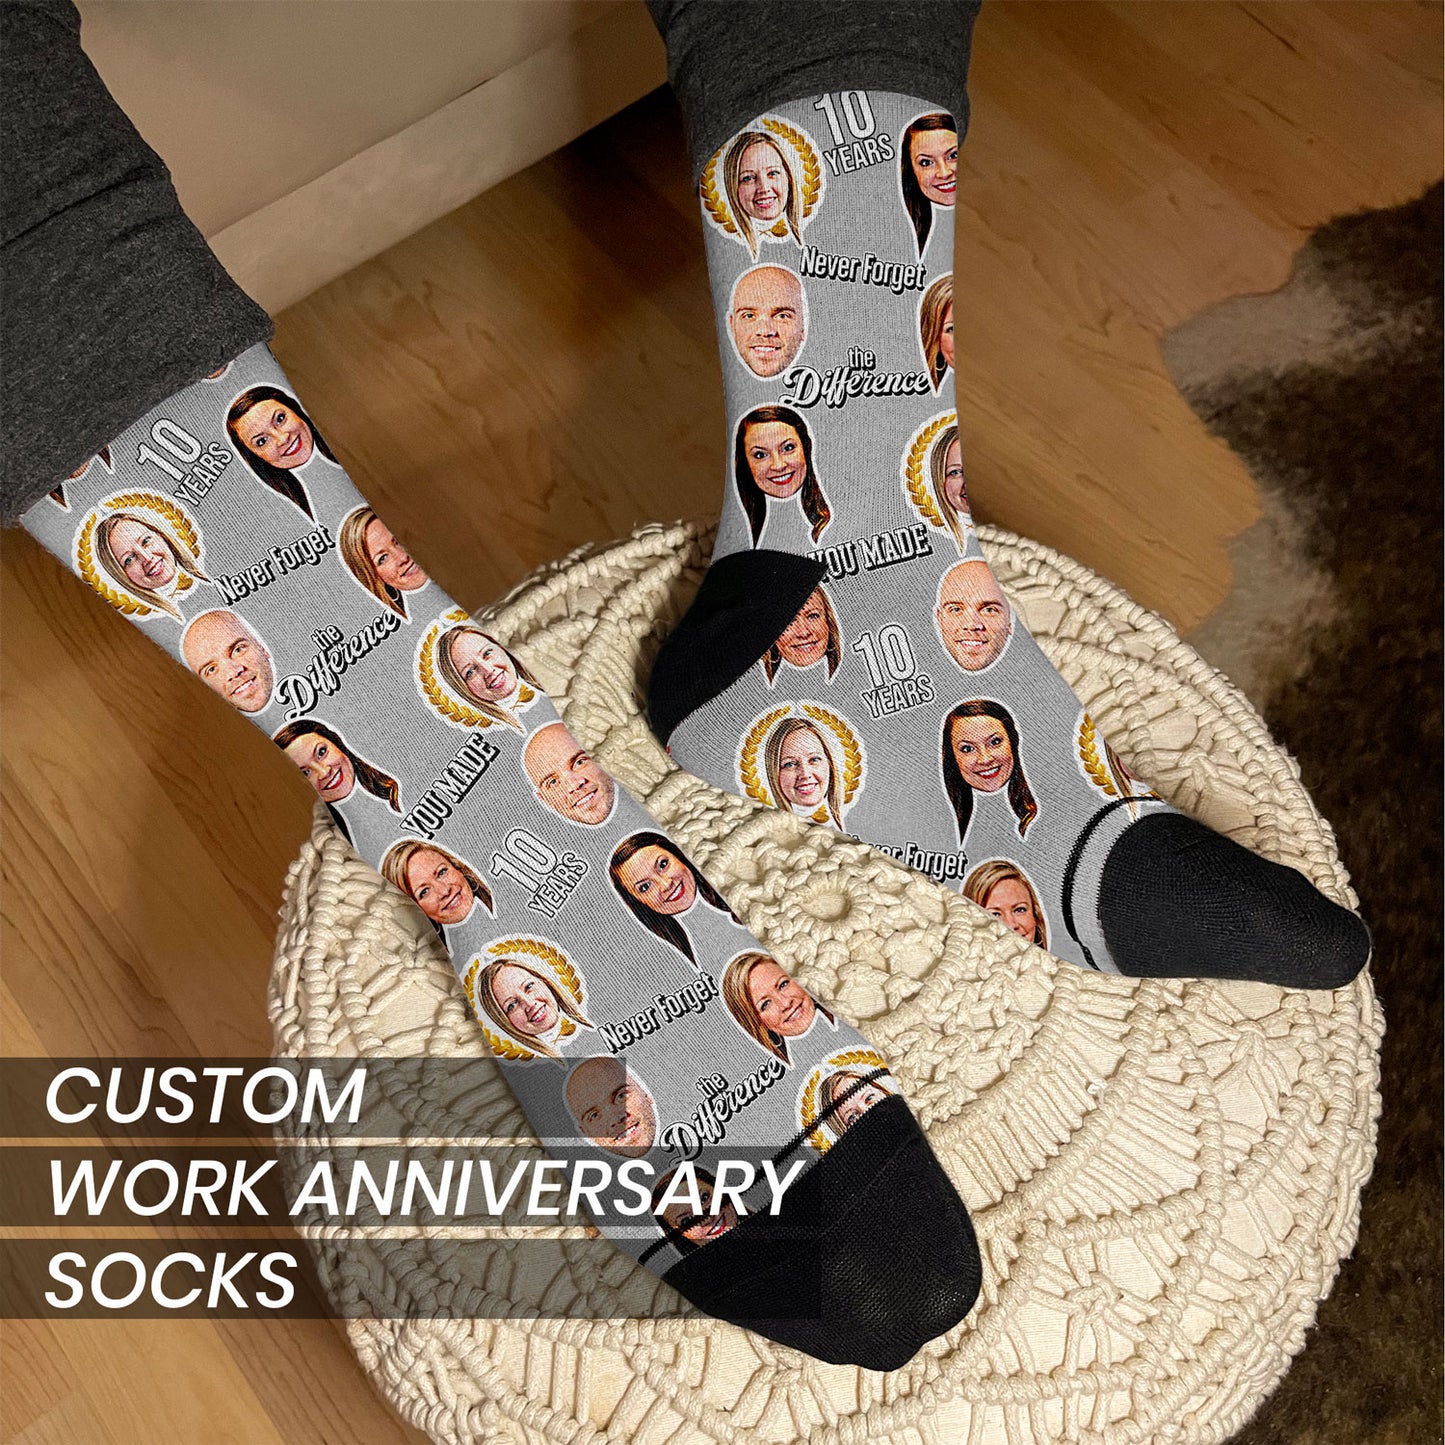 employee anniversary personalized socks with coworkers faces on men feet